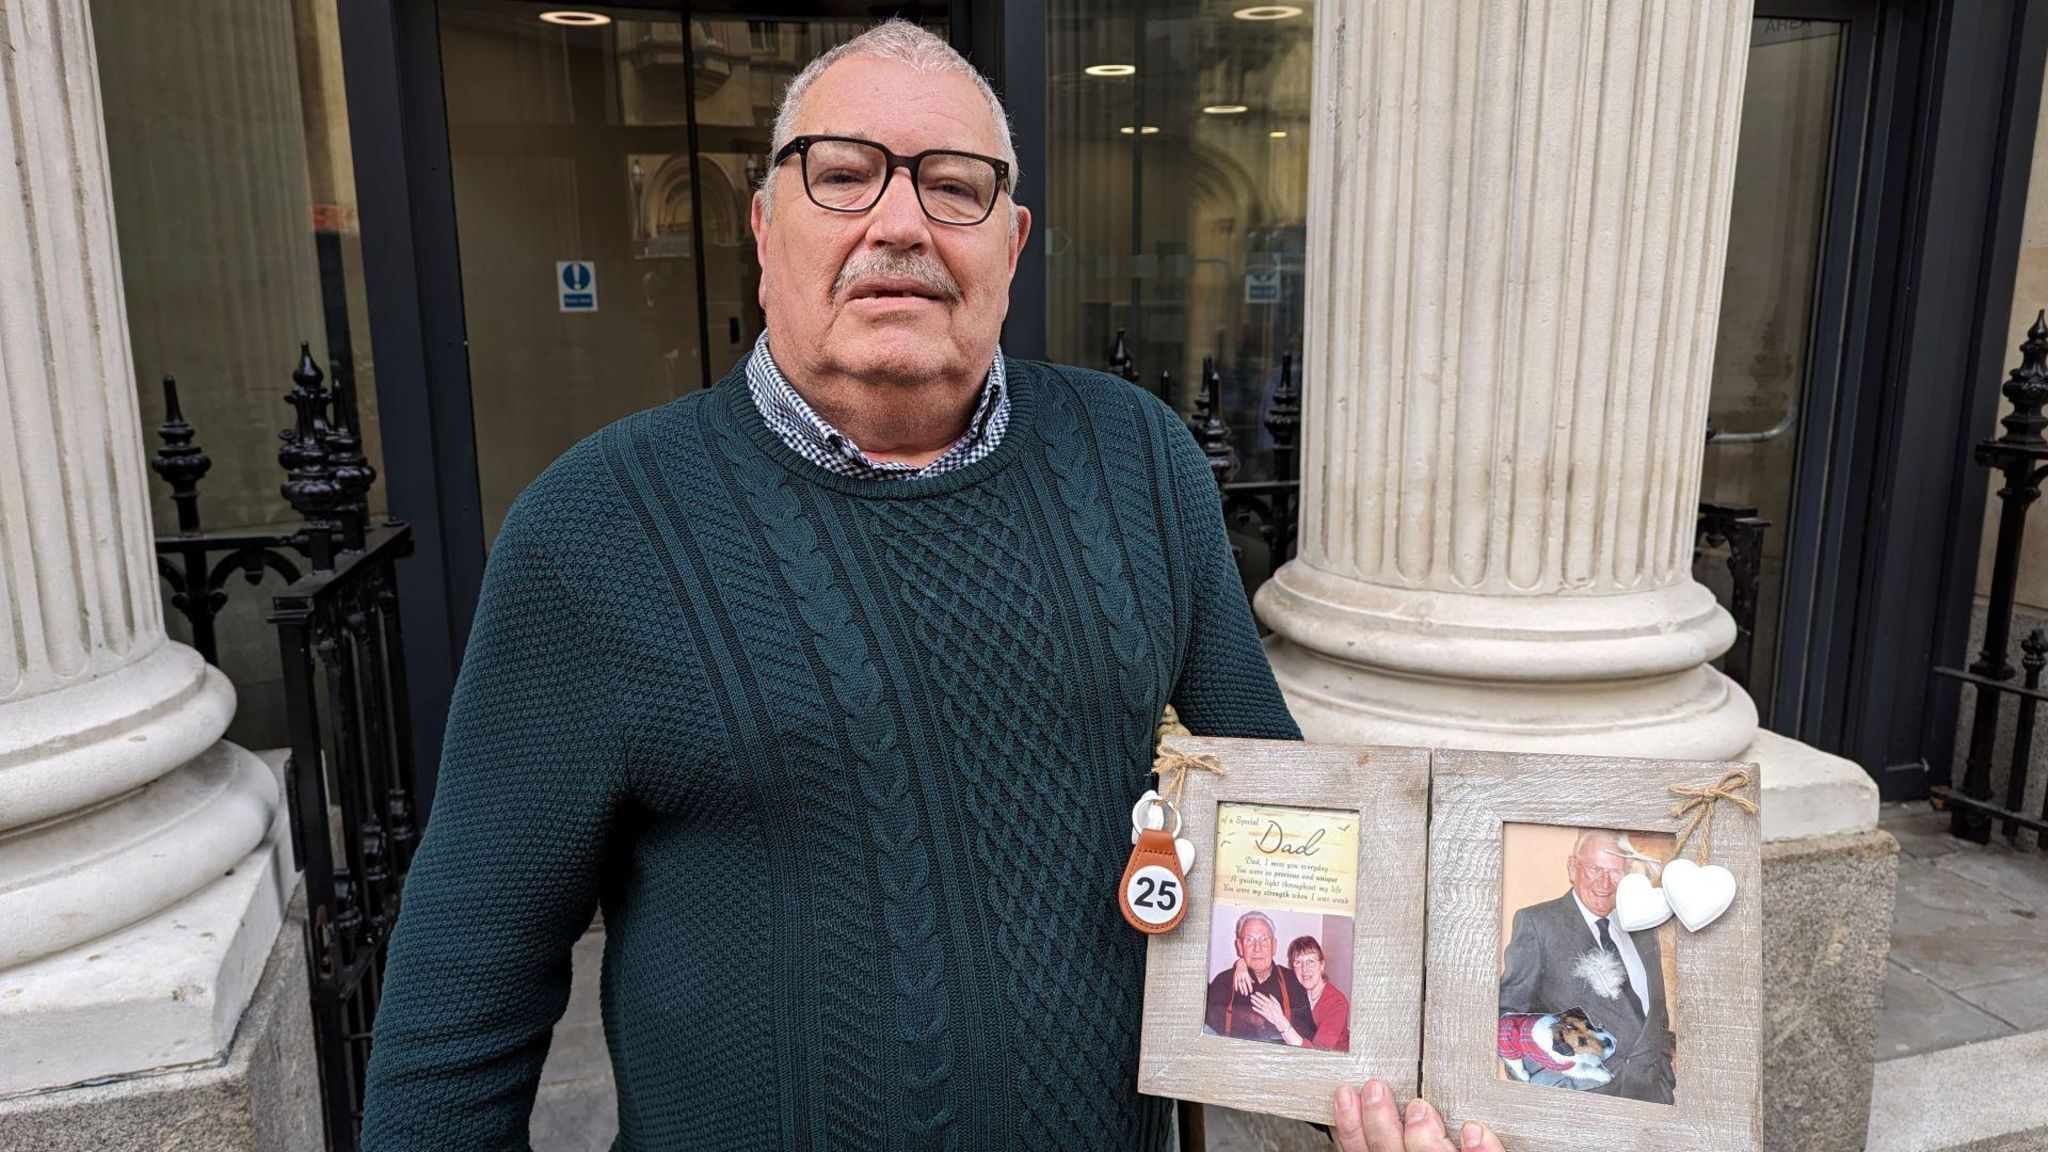 Kevin Burge outside court holding a picture of his father